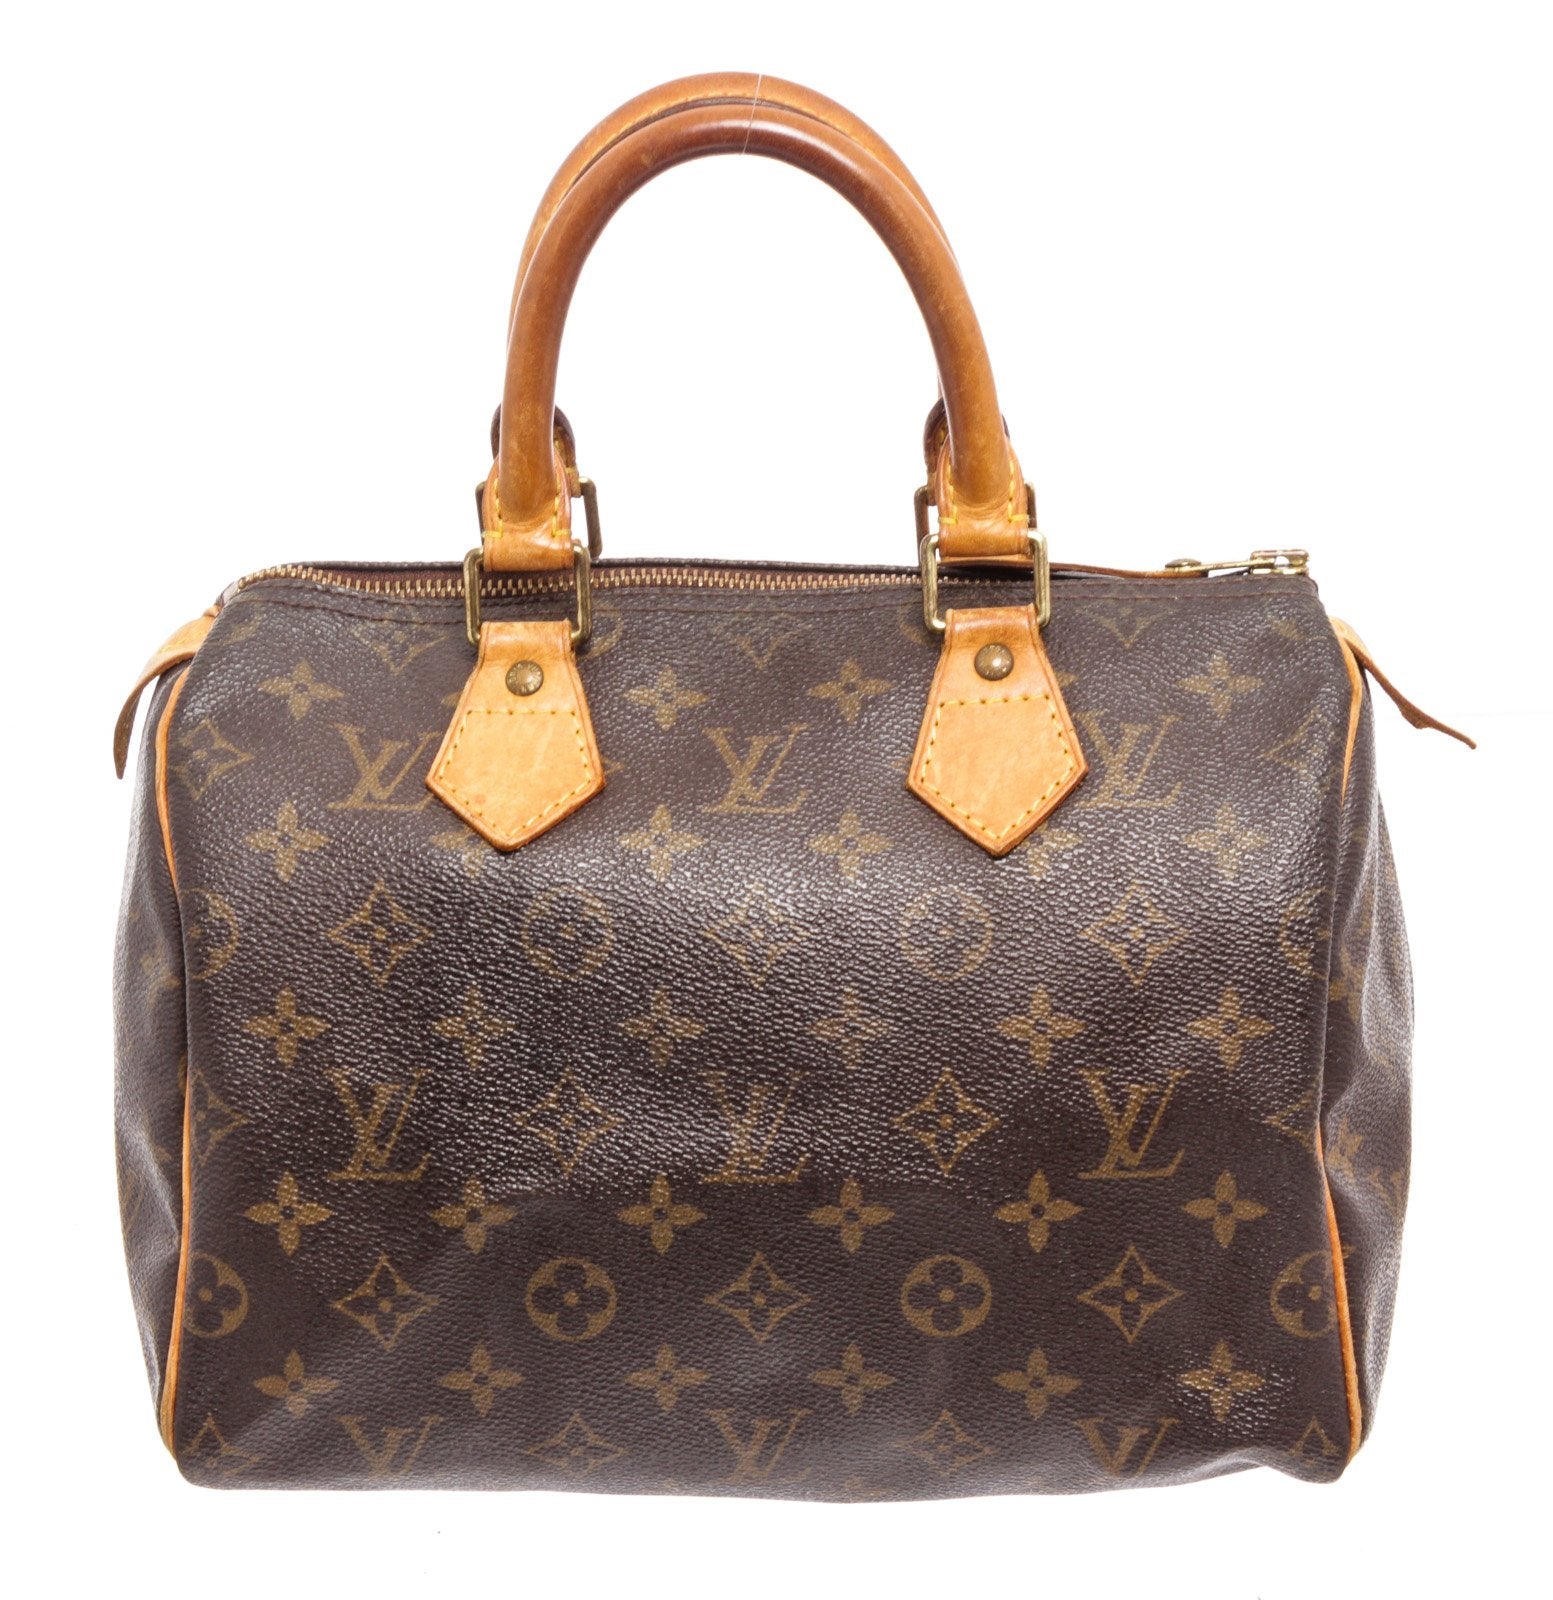 Louis Vuitton, Bags, Authentic Lv Speedy 25 982 With Lock 214